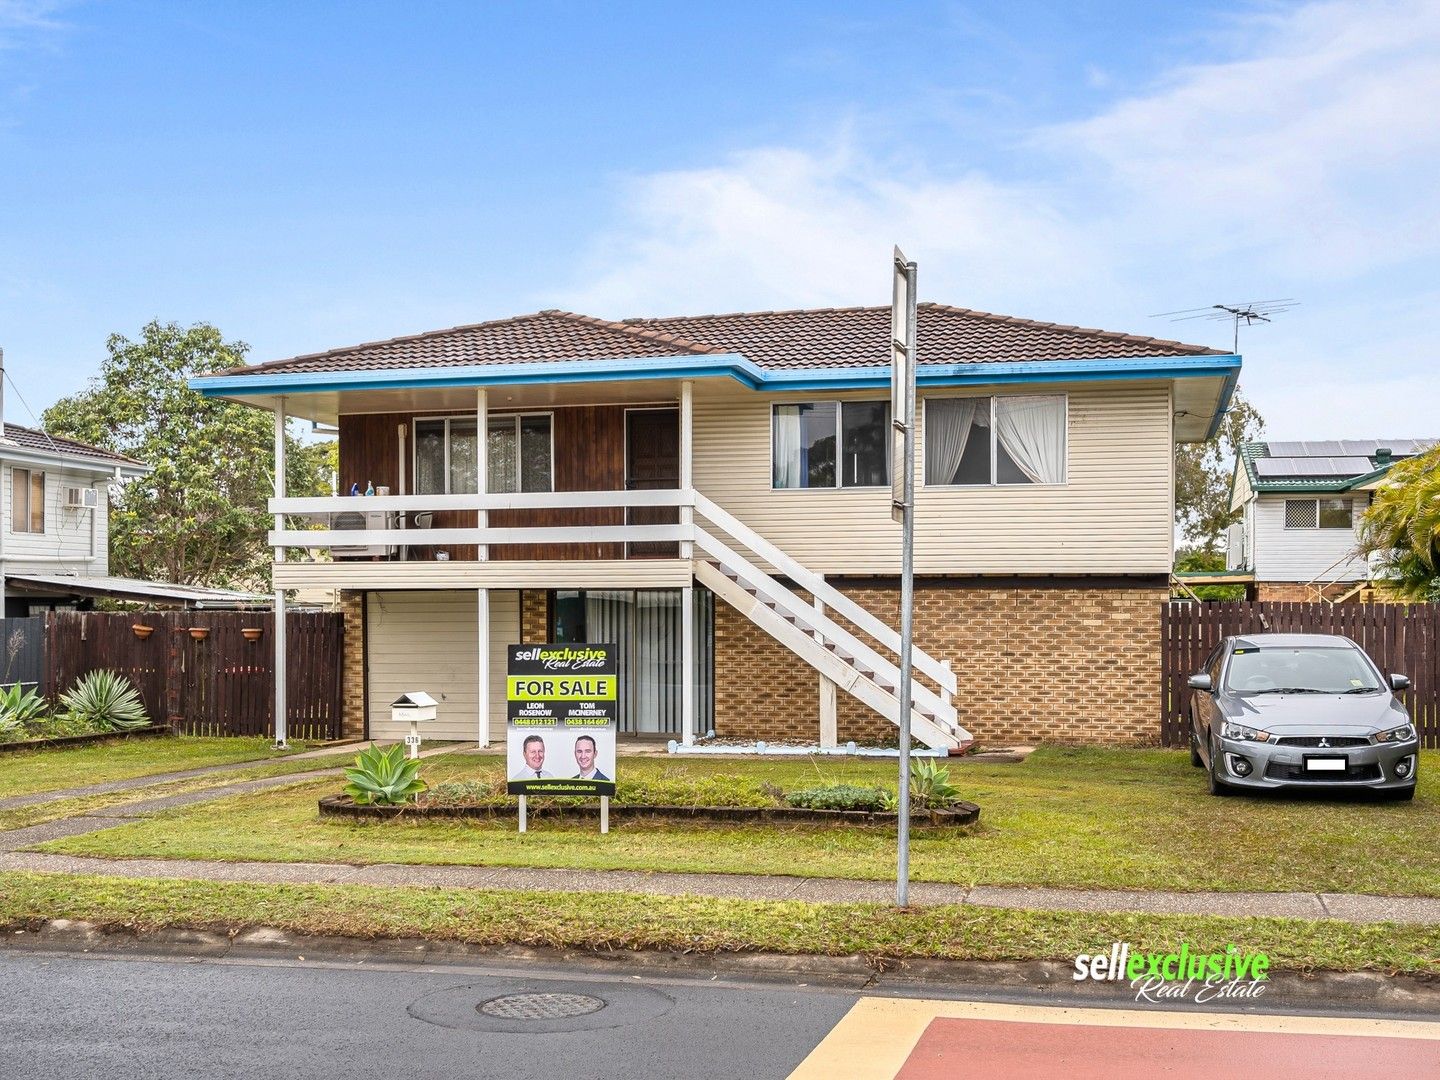 3 bedrooms House in 336 Beams Road ZILLMERE QLD, 4034